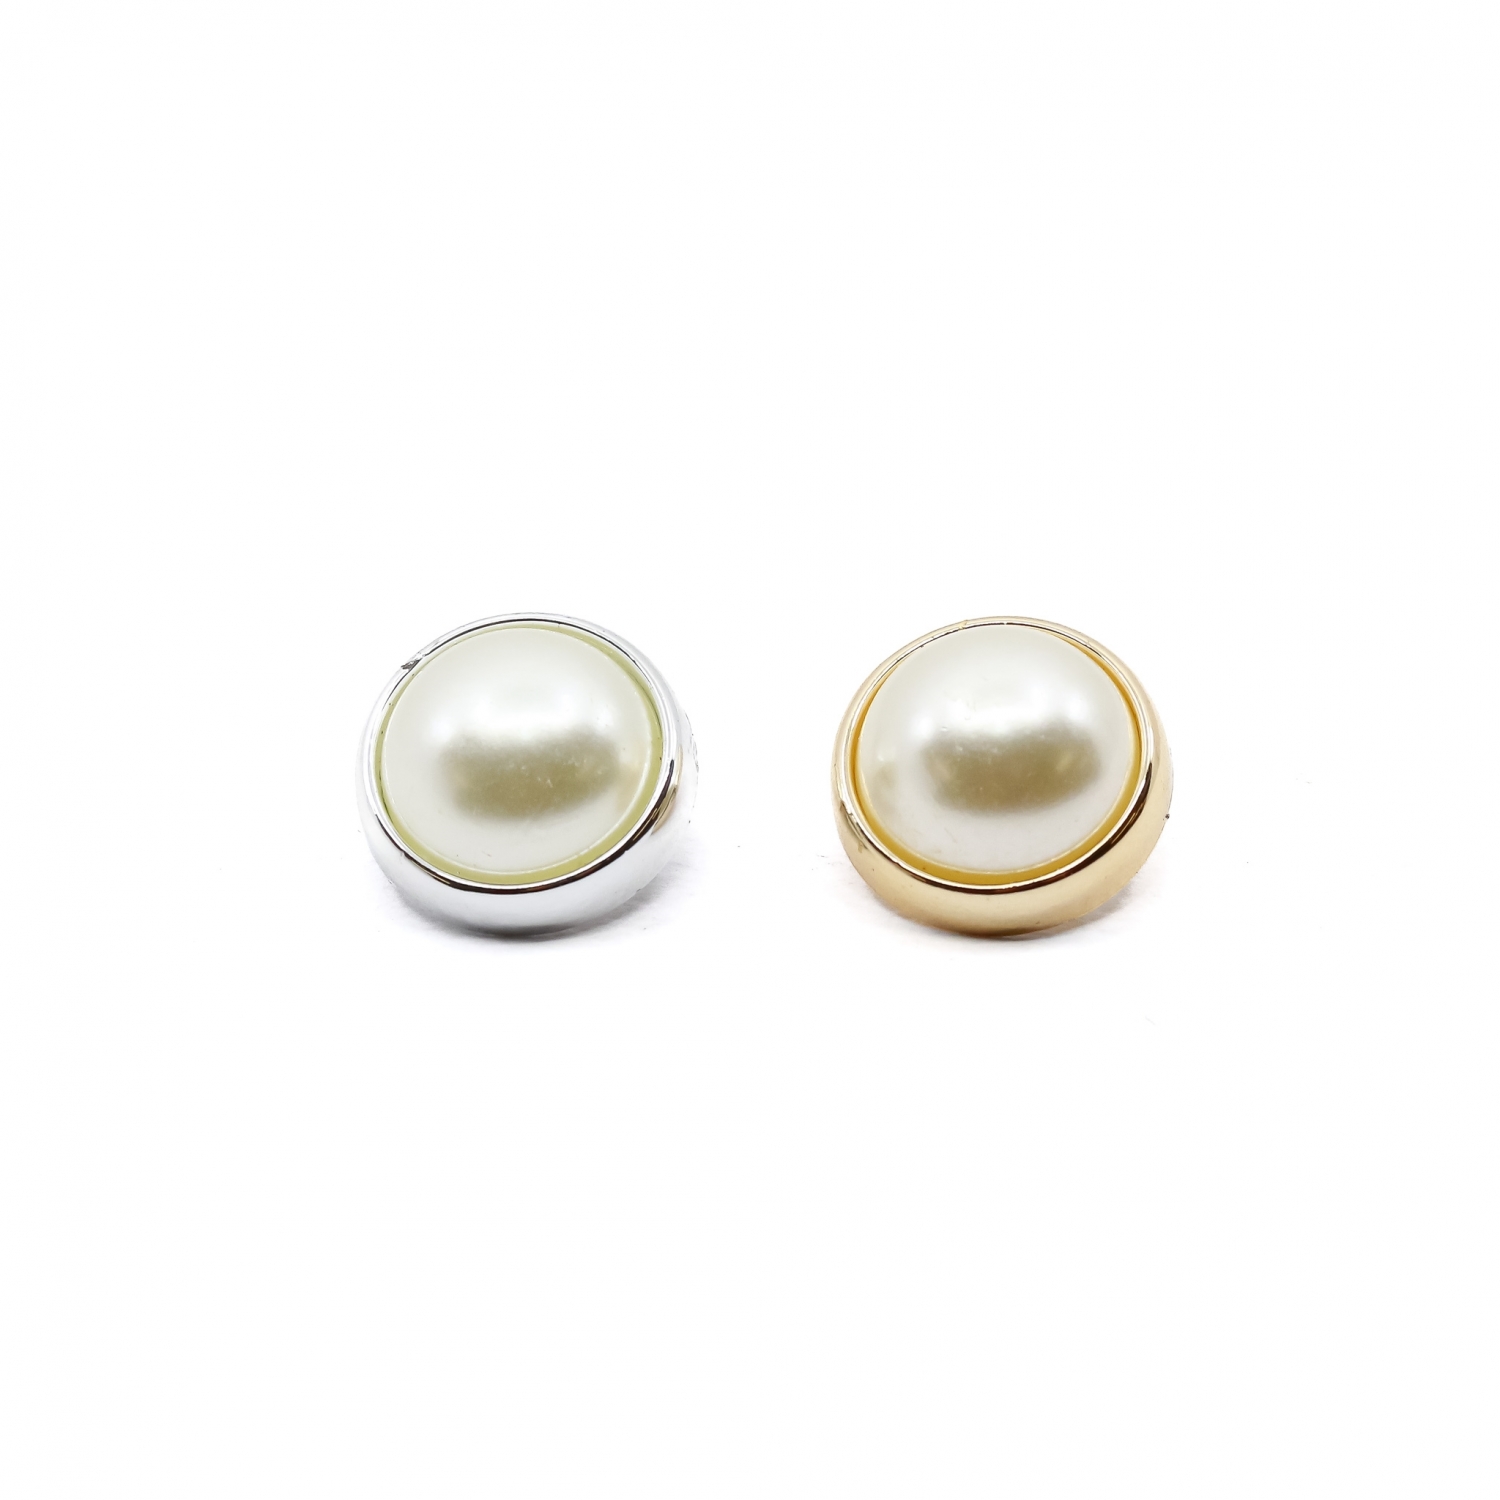 Pearl Shank Buttons, 21 mm (100 pcs/pack) Code: 6311/34